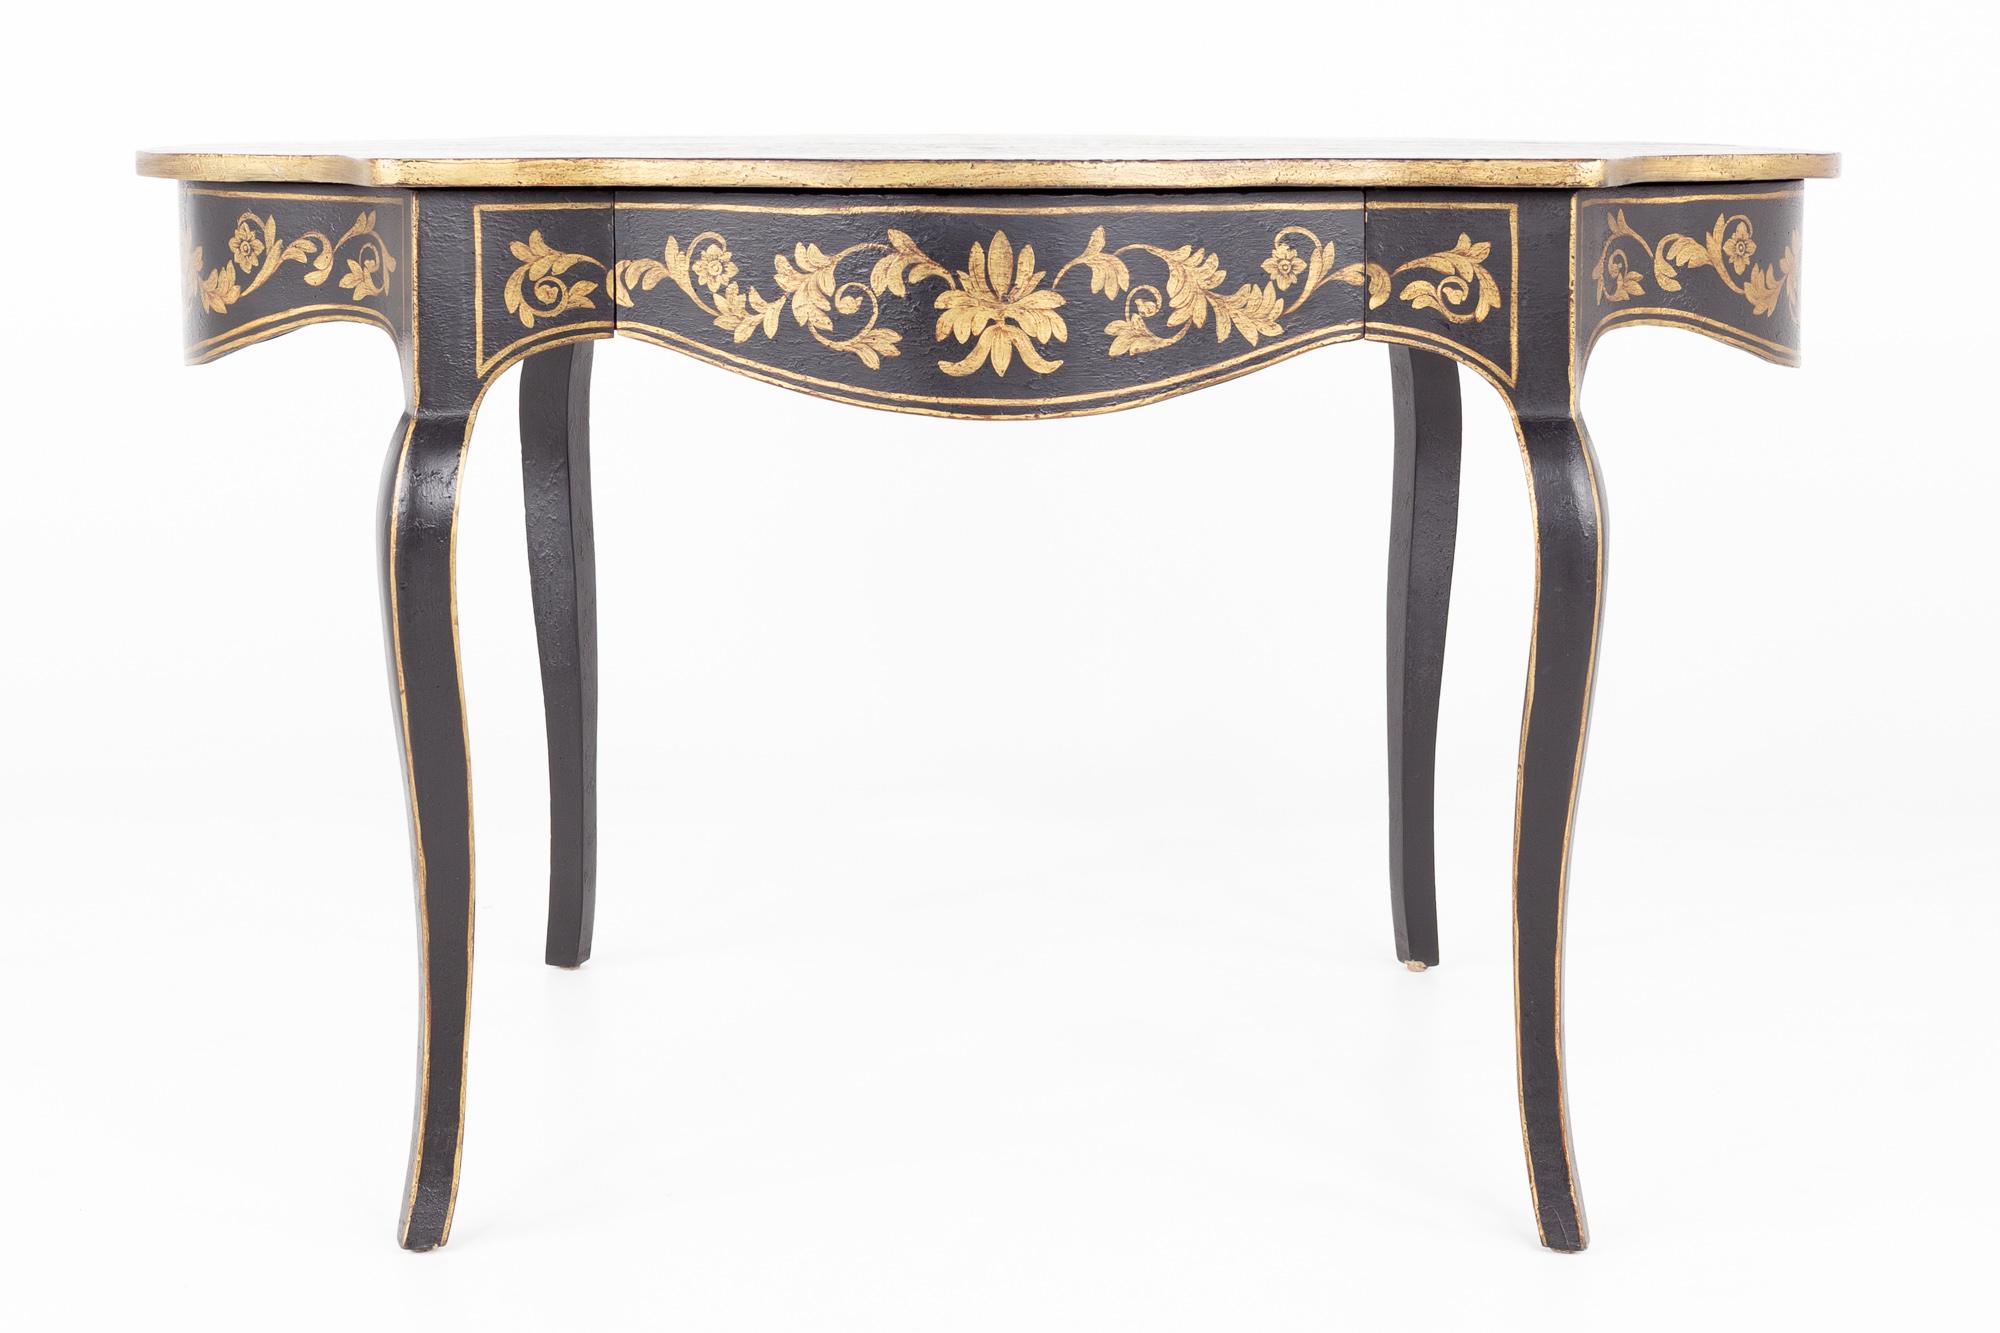 Amy Howard contemporary black and gold desk

This desk measures: 51 wide x 30.5 deep x 29.5 high, with a chair clearance of 22 inches

This piece is in Very Good Vintage Condition - There are a few small splatter marks on top of the piece and some